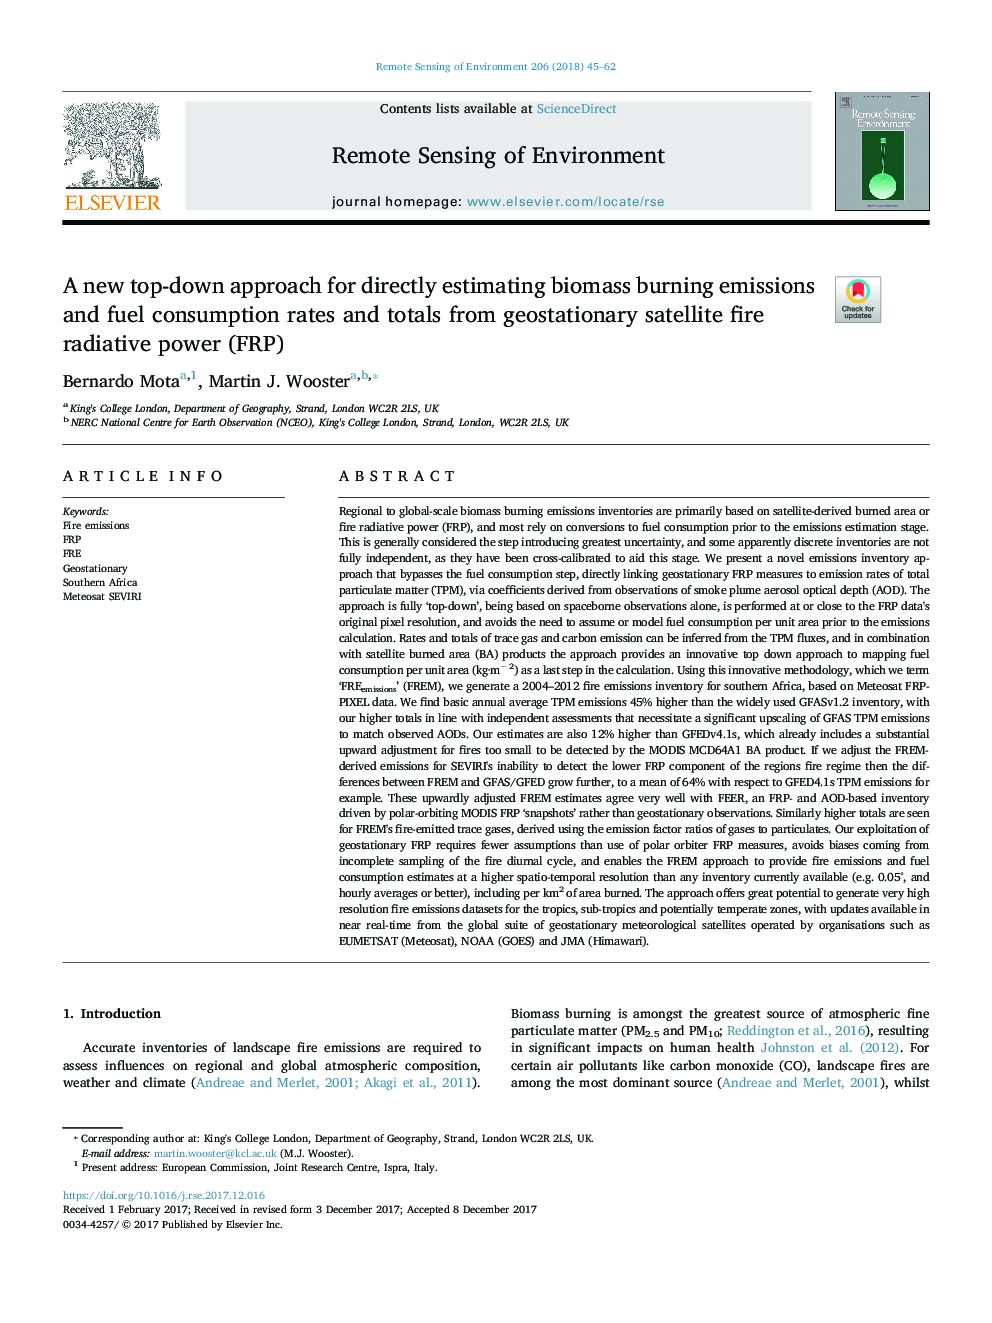 A new top-down approach for directly estimating biomass burning emissions and fuel consumption rates and totals from geostationary satellite fire radiative power (FRP)